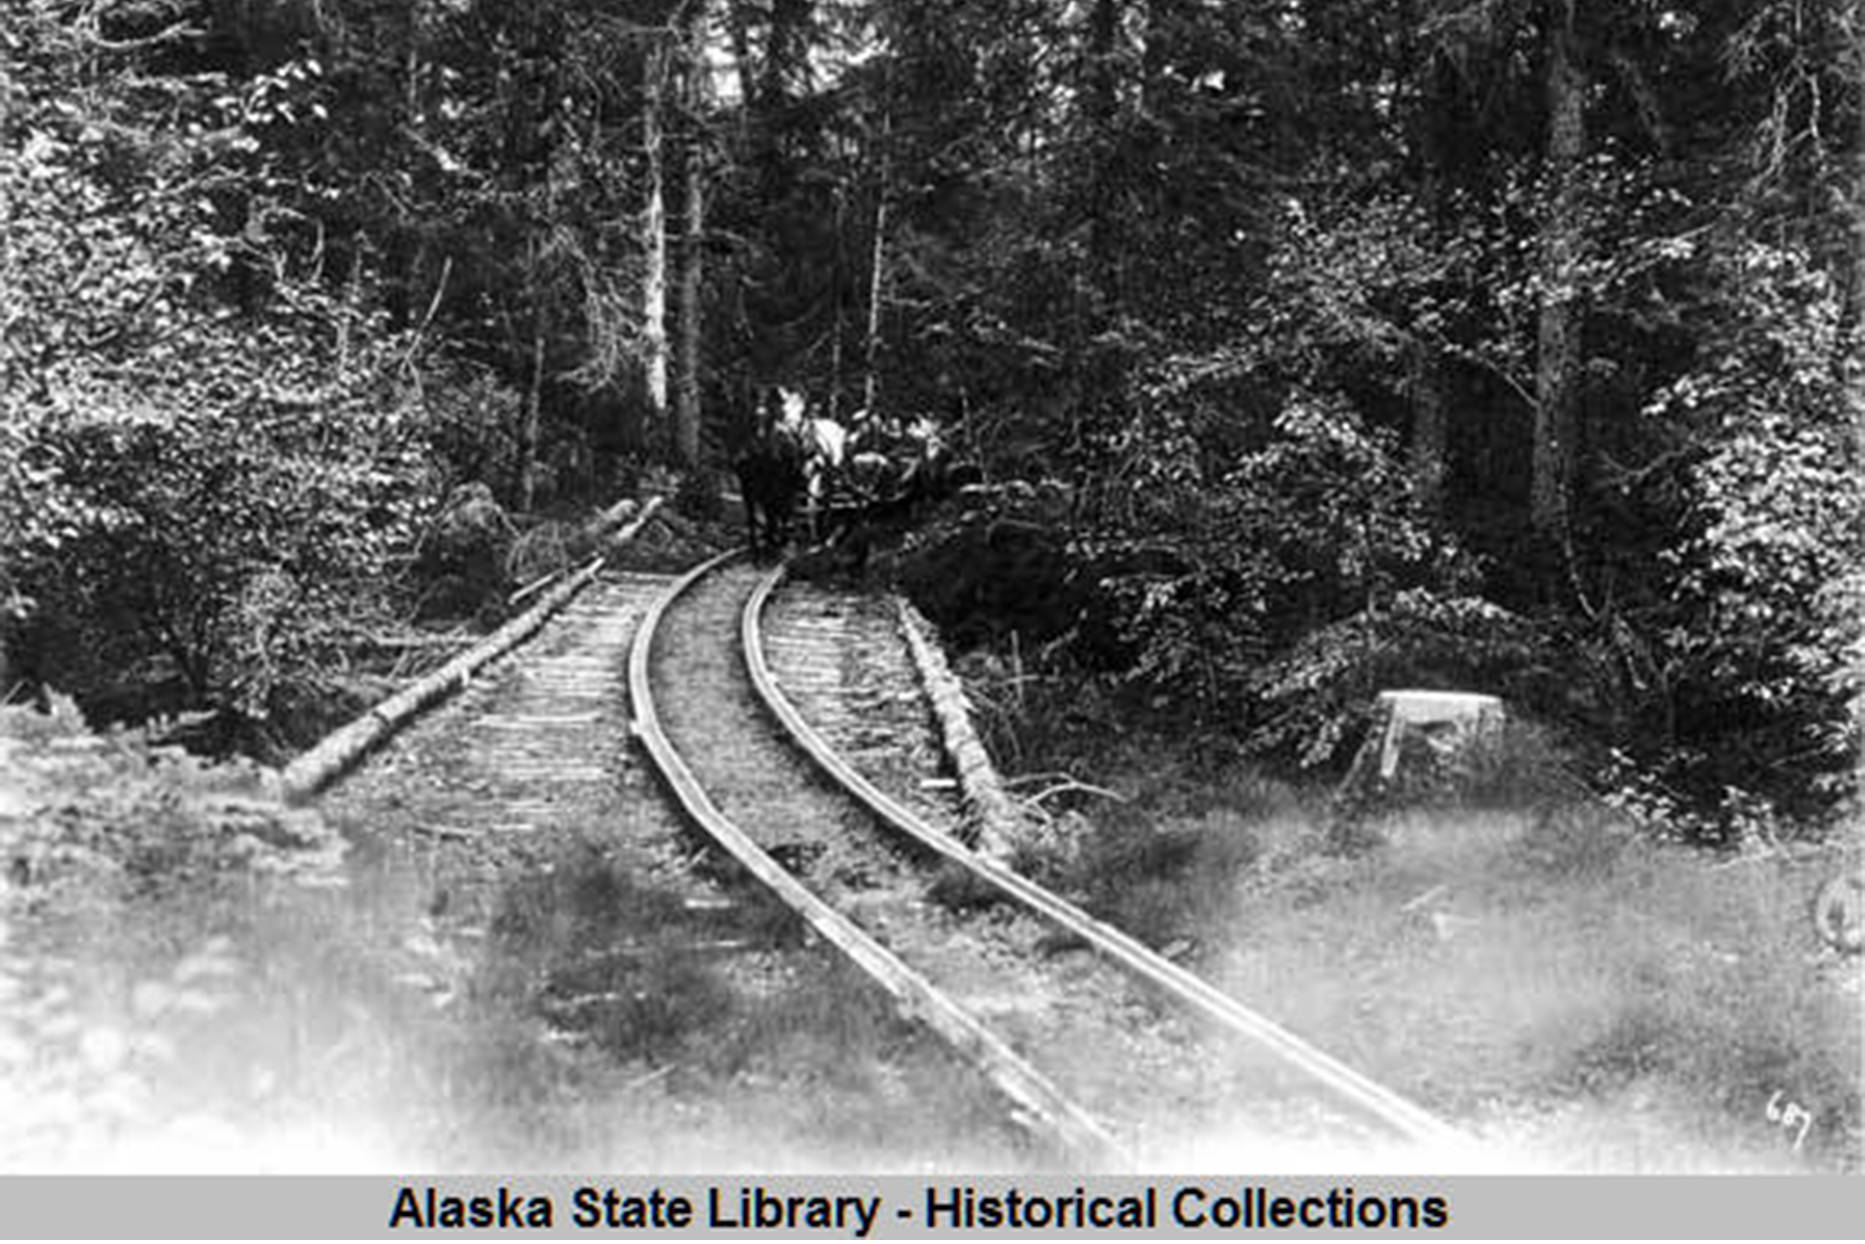 Do you know the history behind the Horse Tram Trail?